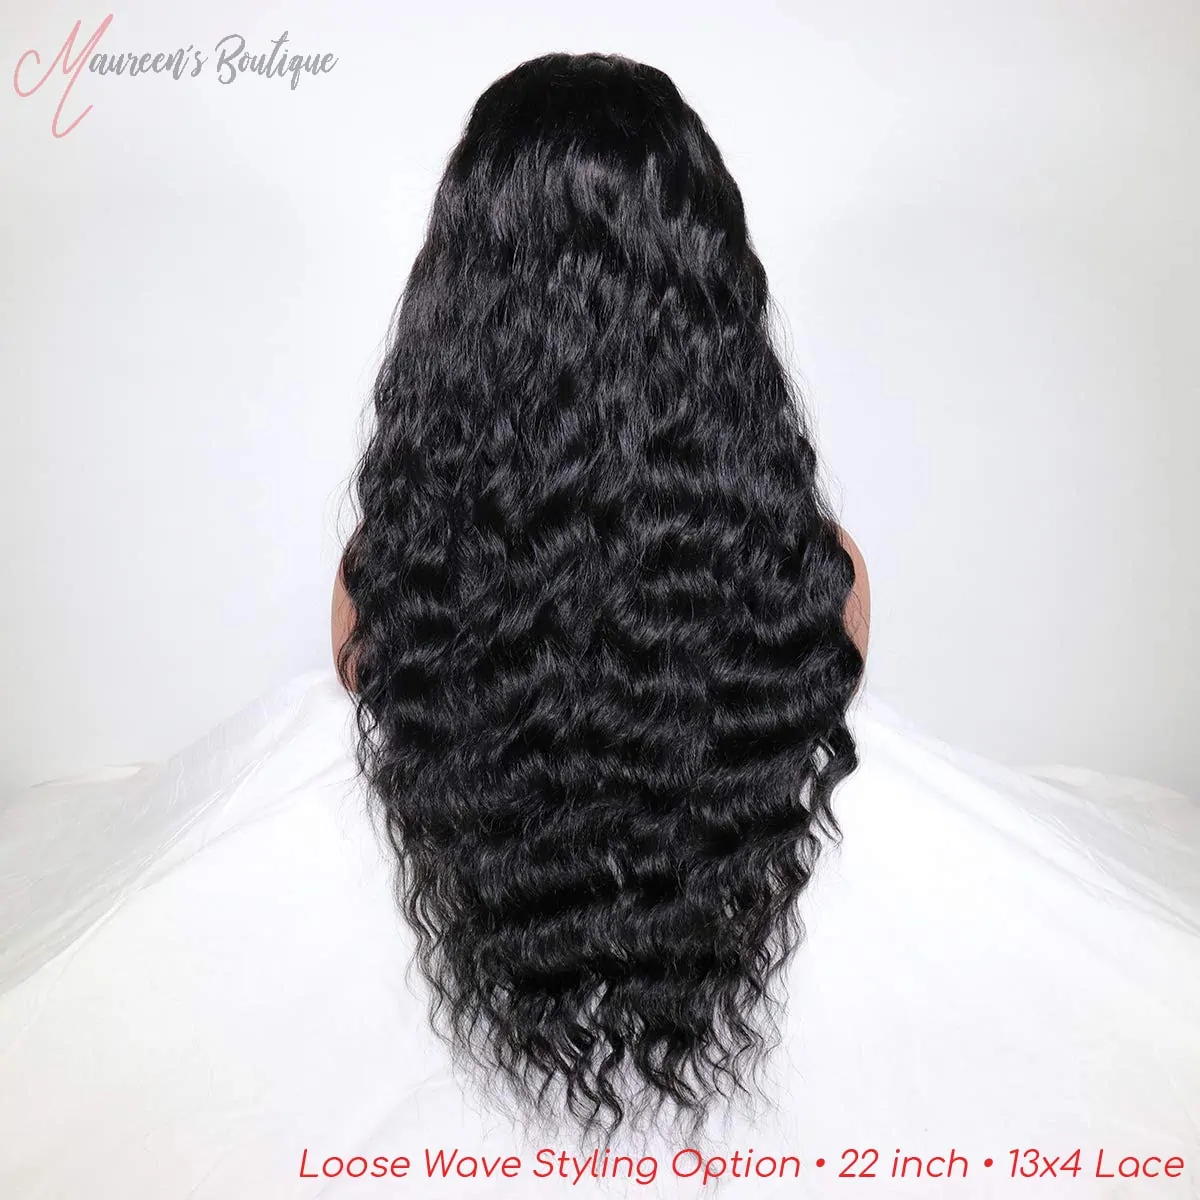 Loose wave wig styling example 2